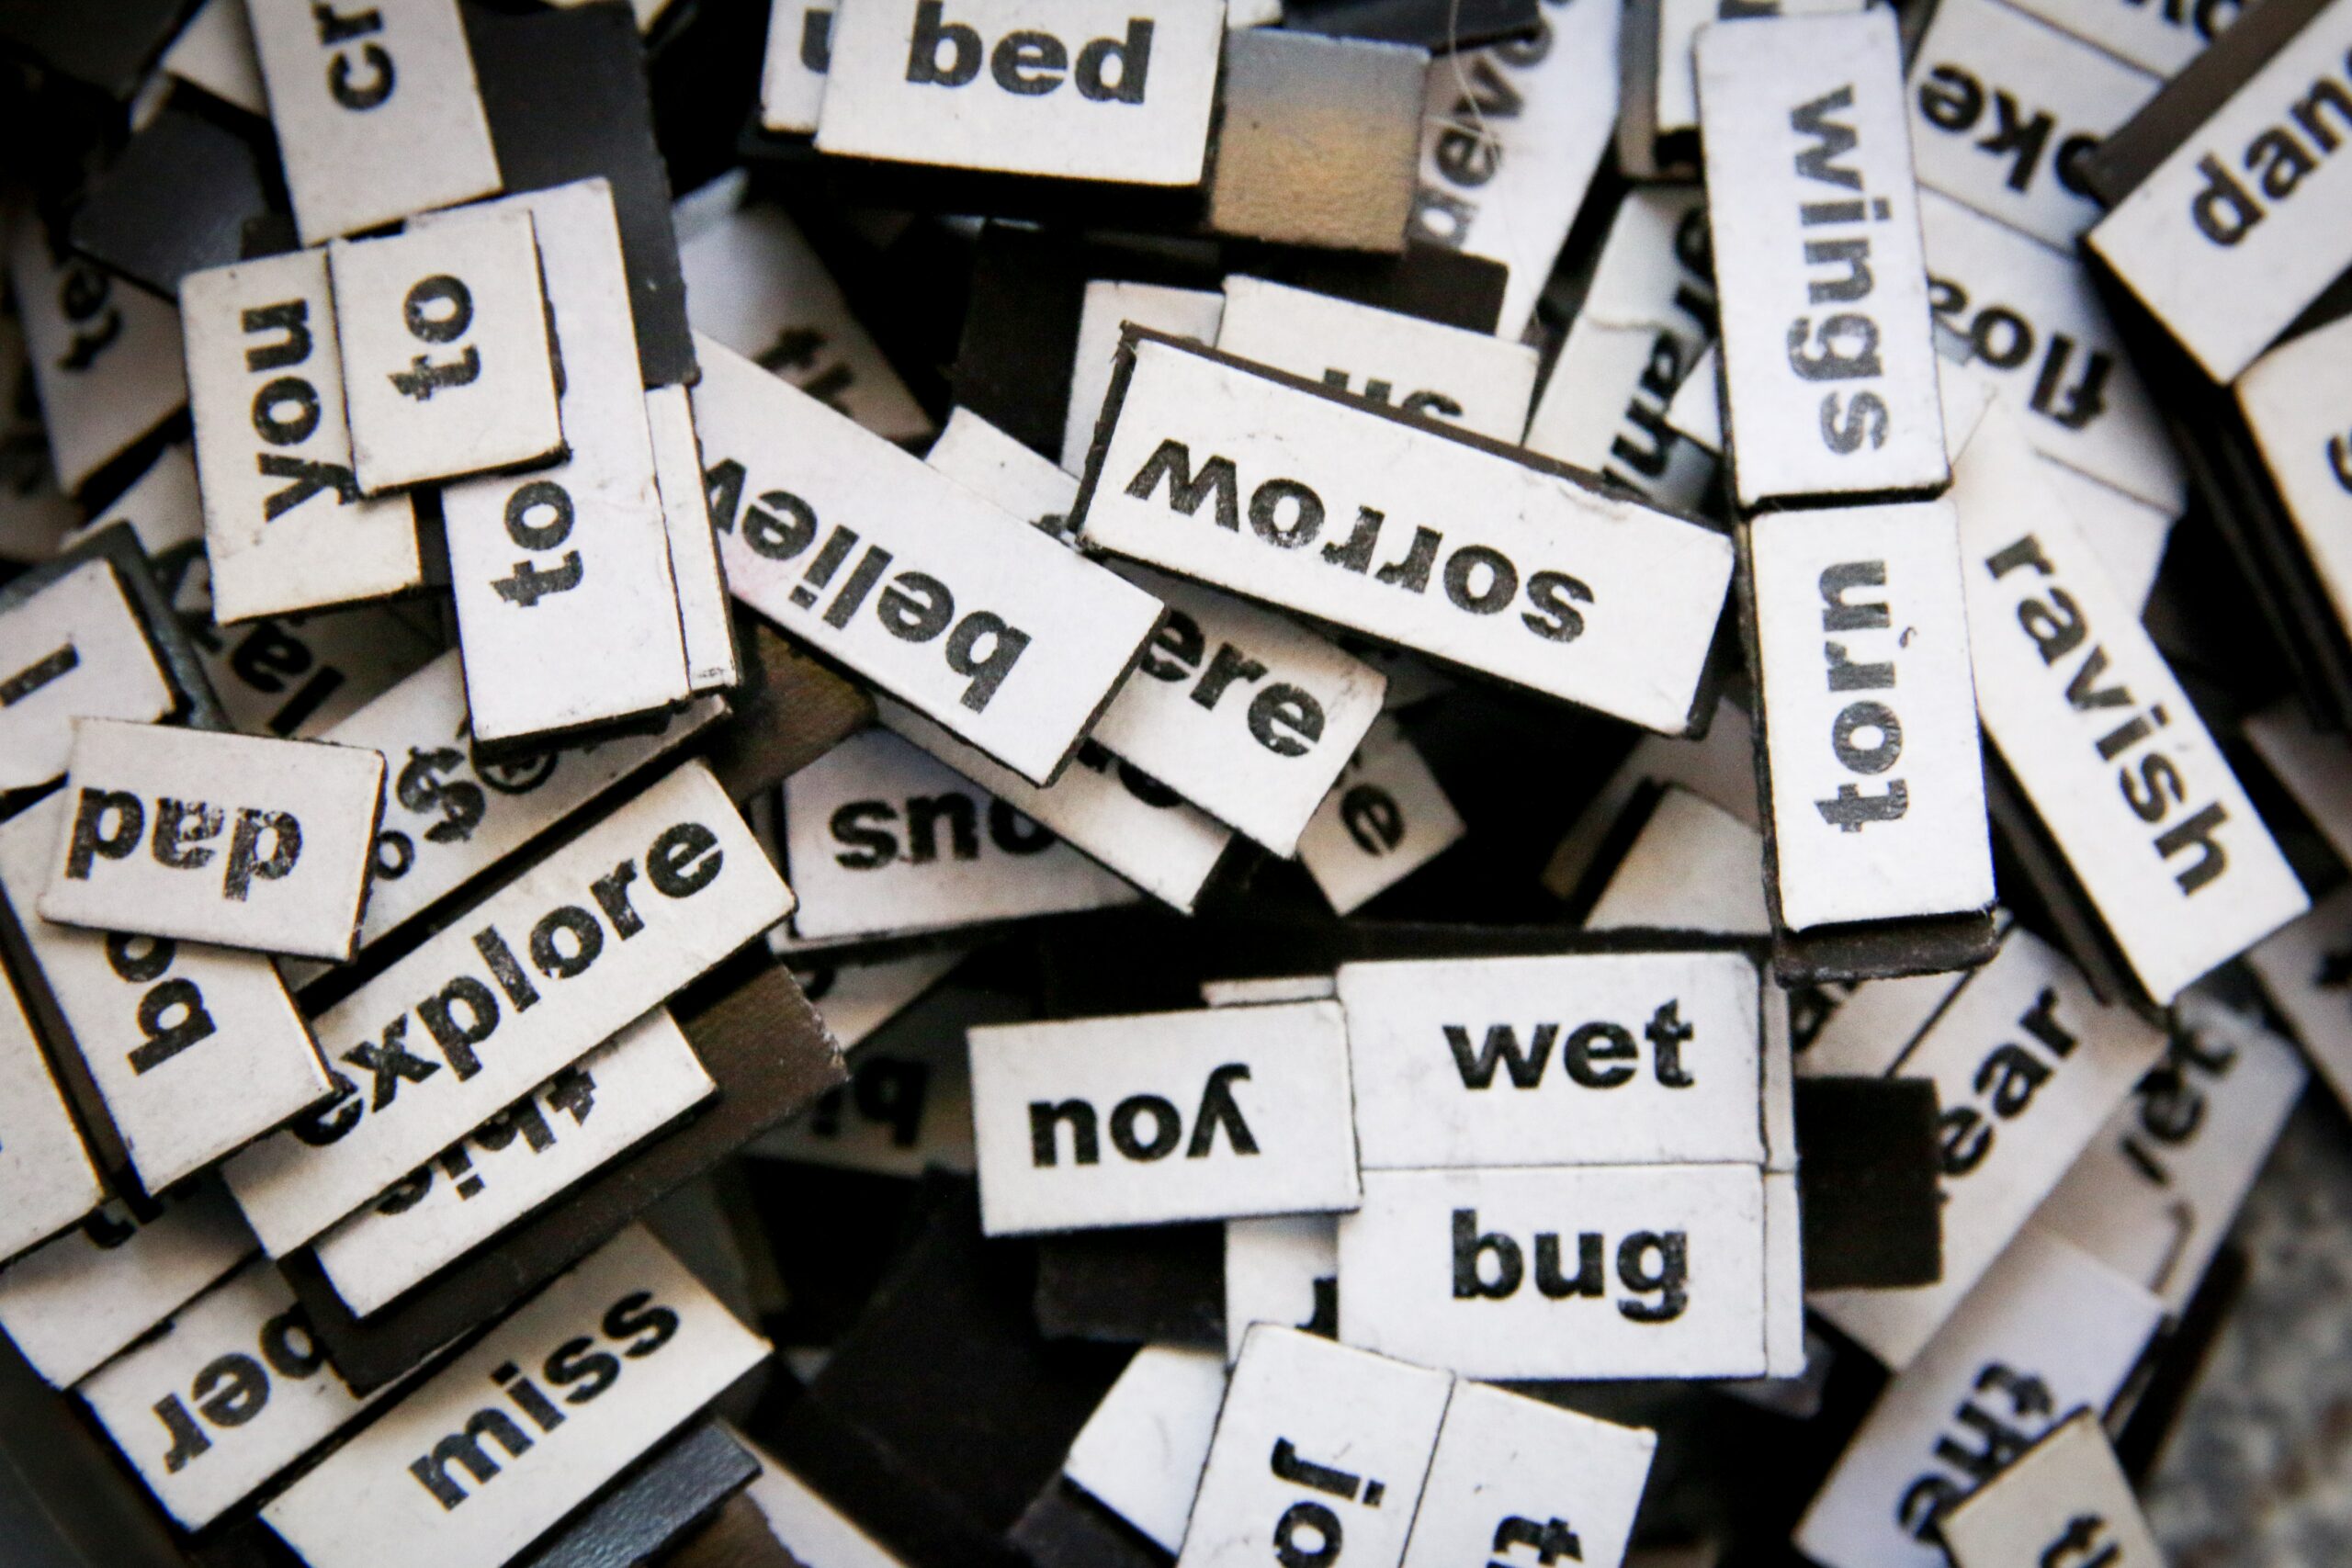 A collection of fridge magnets fill the photo. They have words printed on them. Some of the most visible ones are: wet, bug, explore, sorrow, torn, bed, wings, miss.